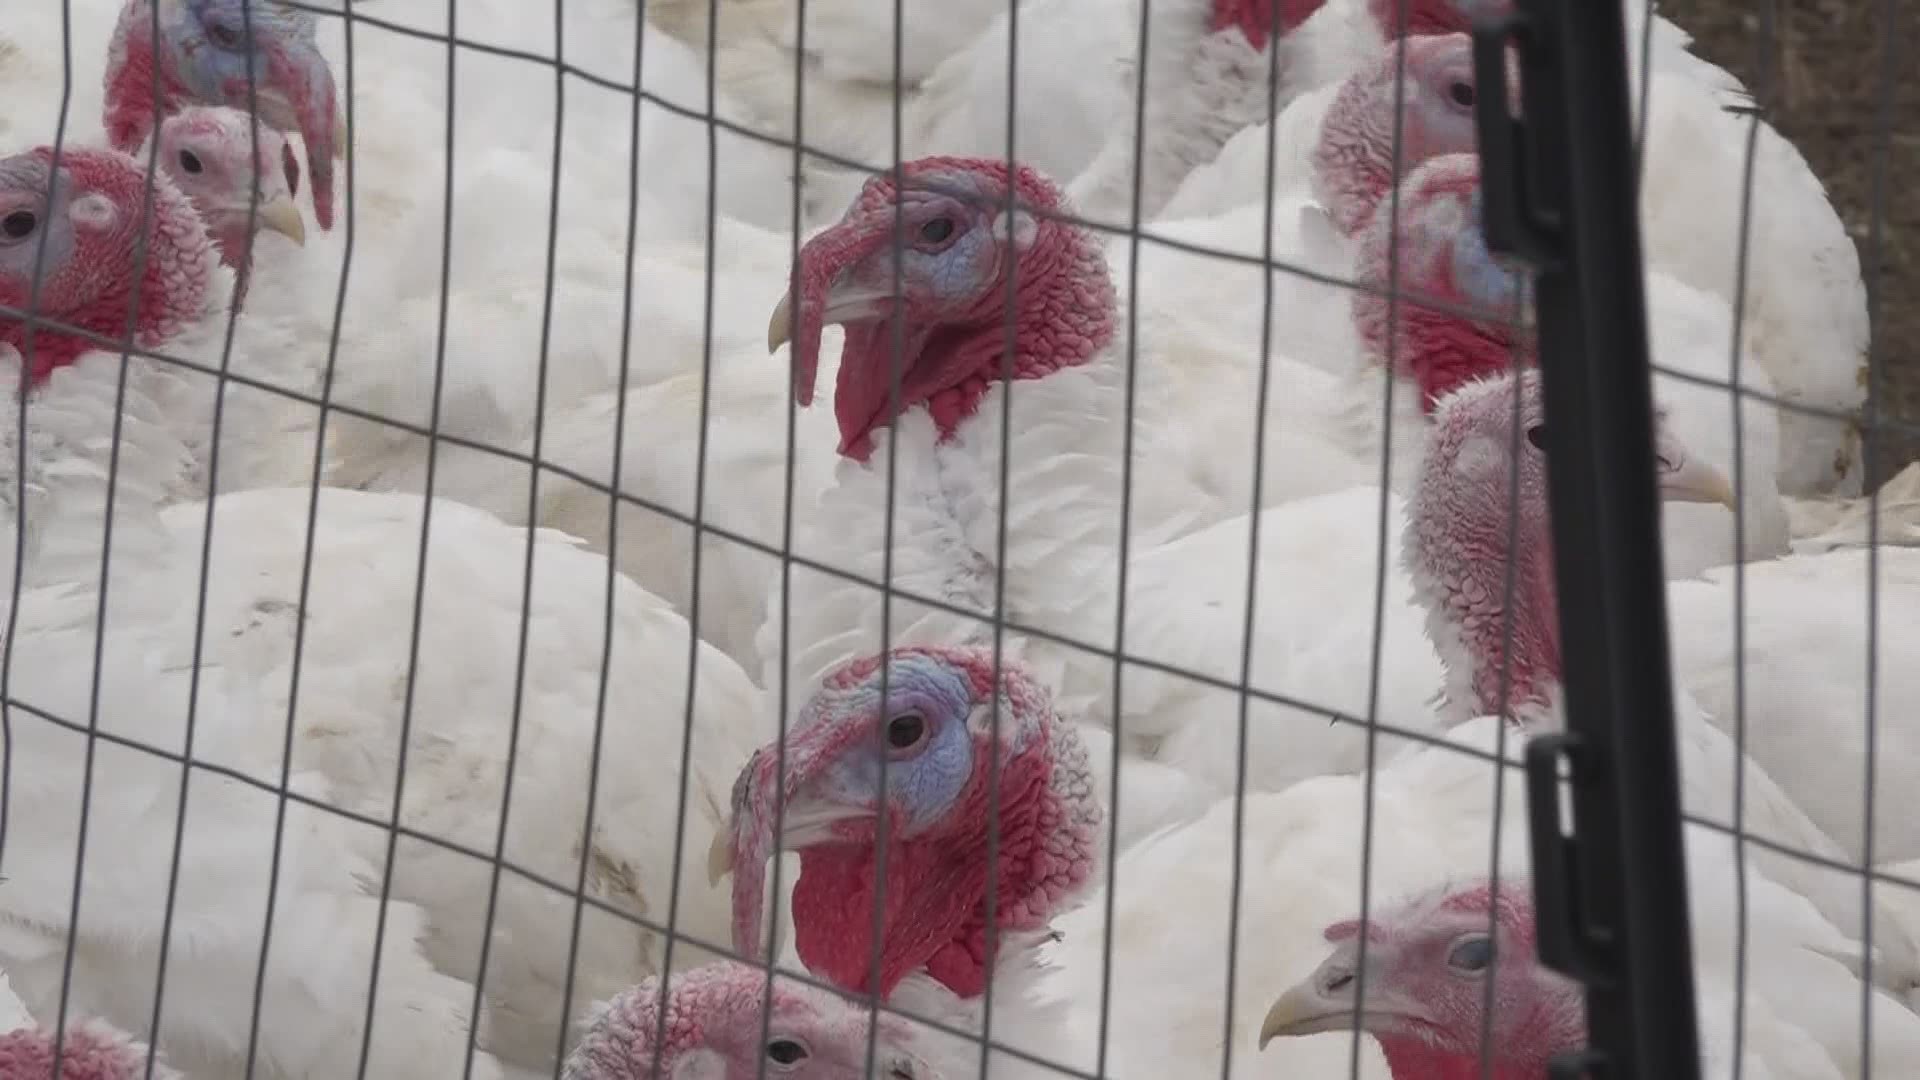 Turkey farm owners say the demand for large turkeys isn't stopping due to smaller holiday gatherings.